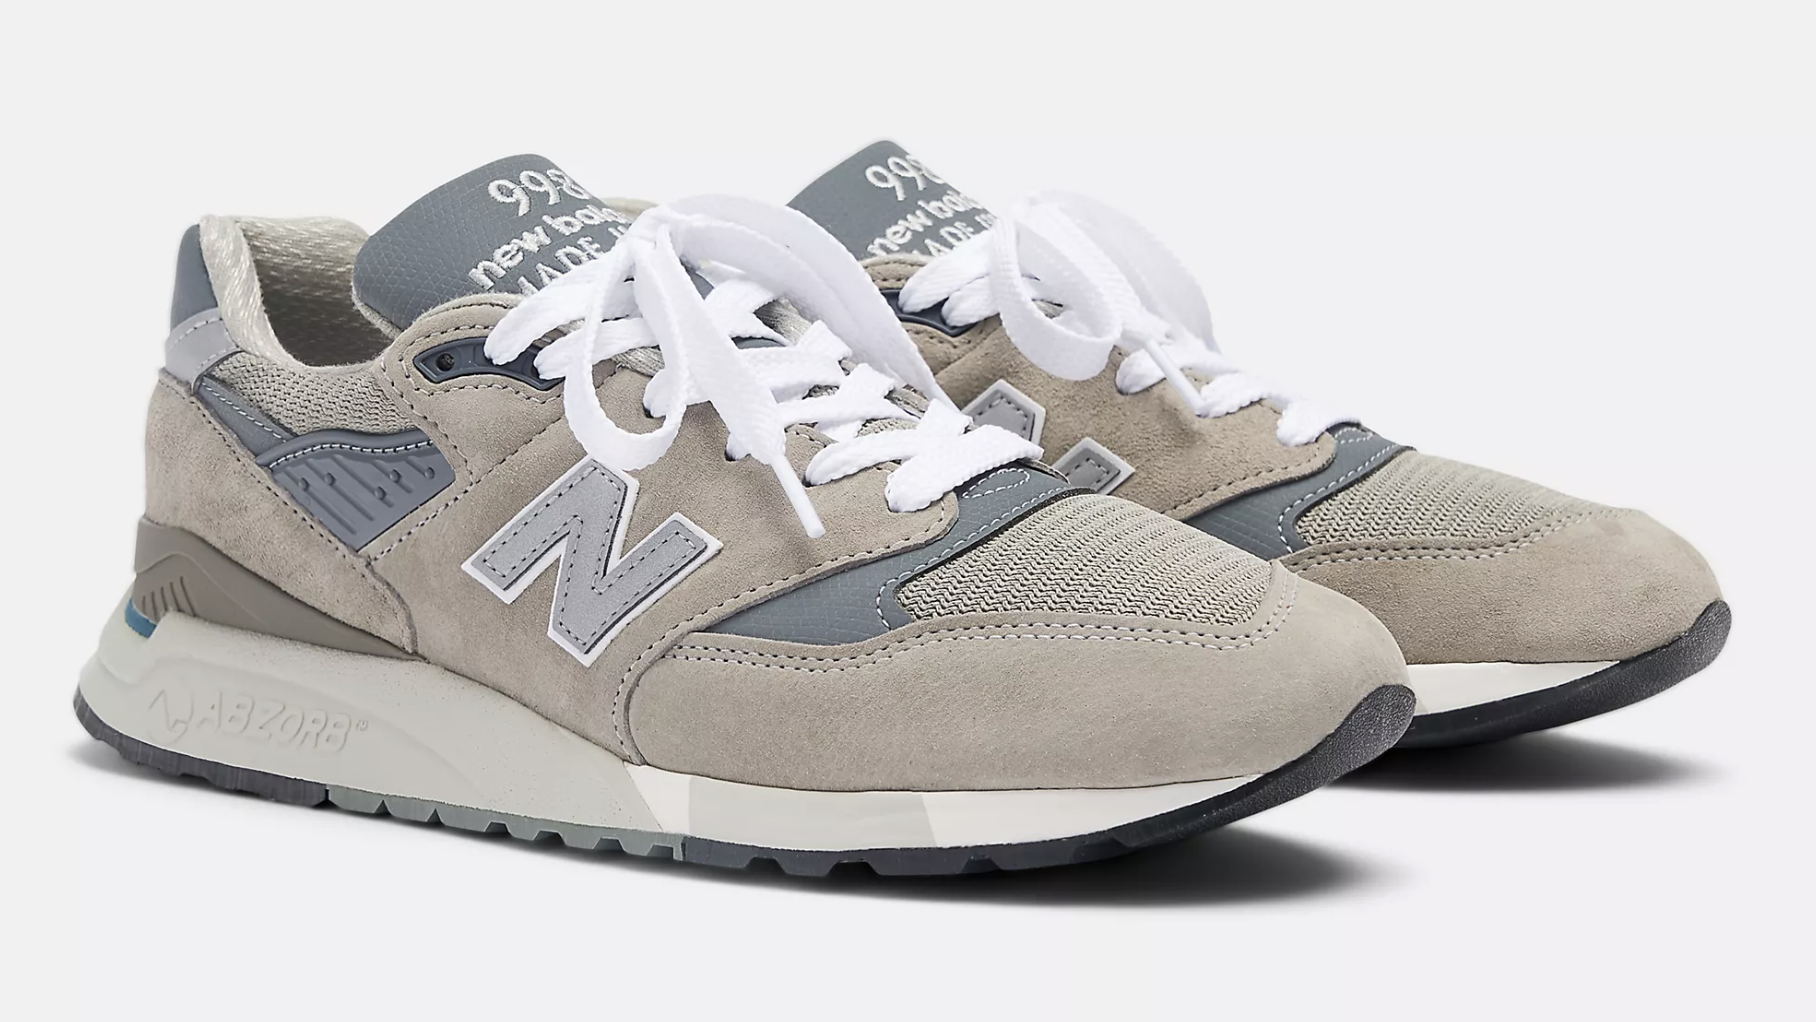 New Balance Brings Back This OG 998 Colorway